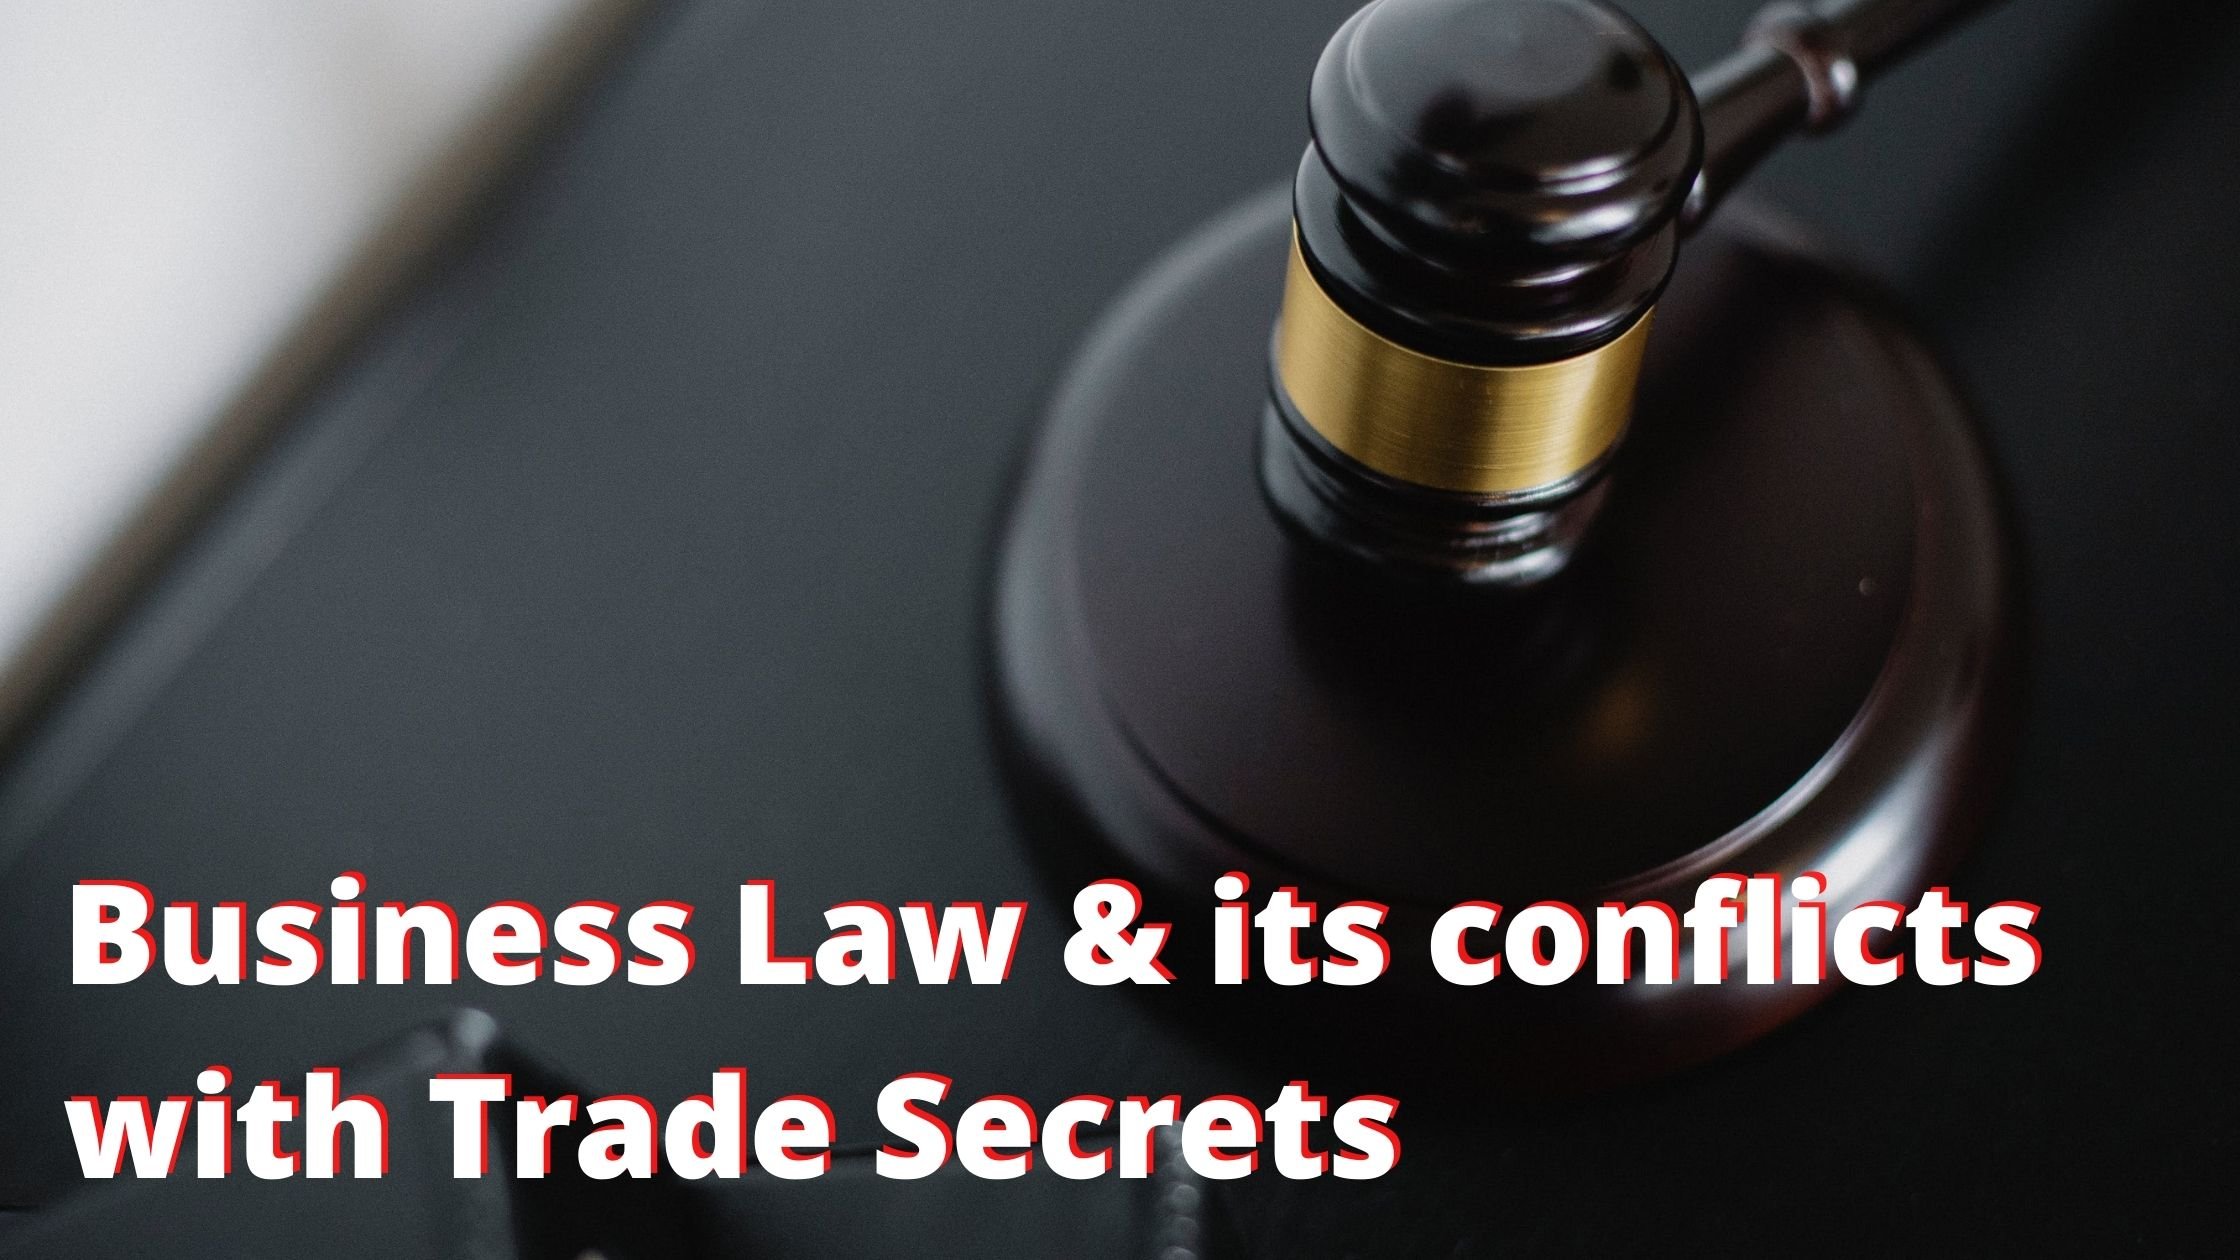 Business Law & its conflicts with Trade Secrets